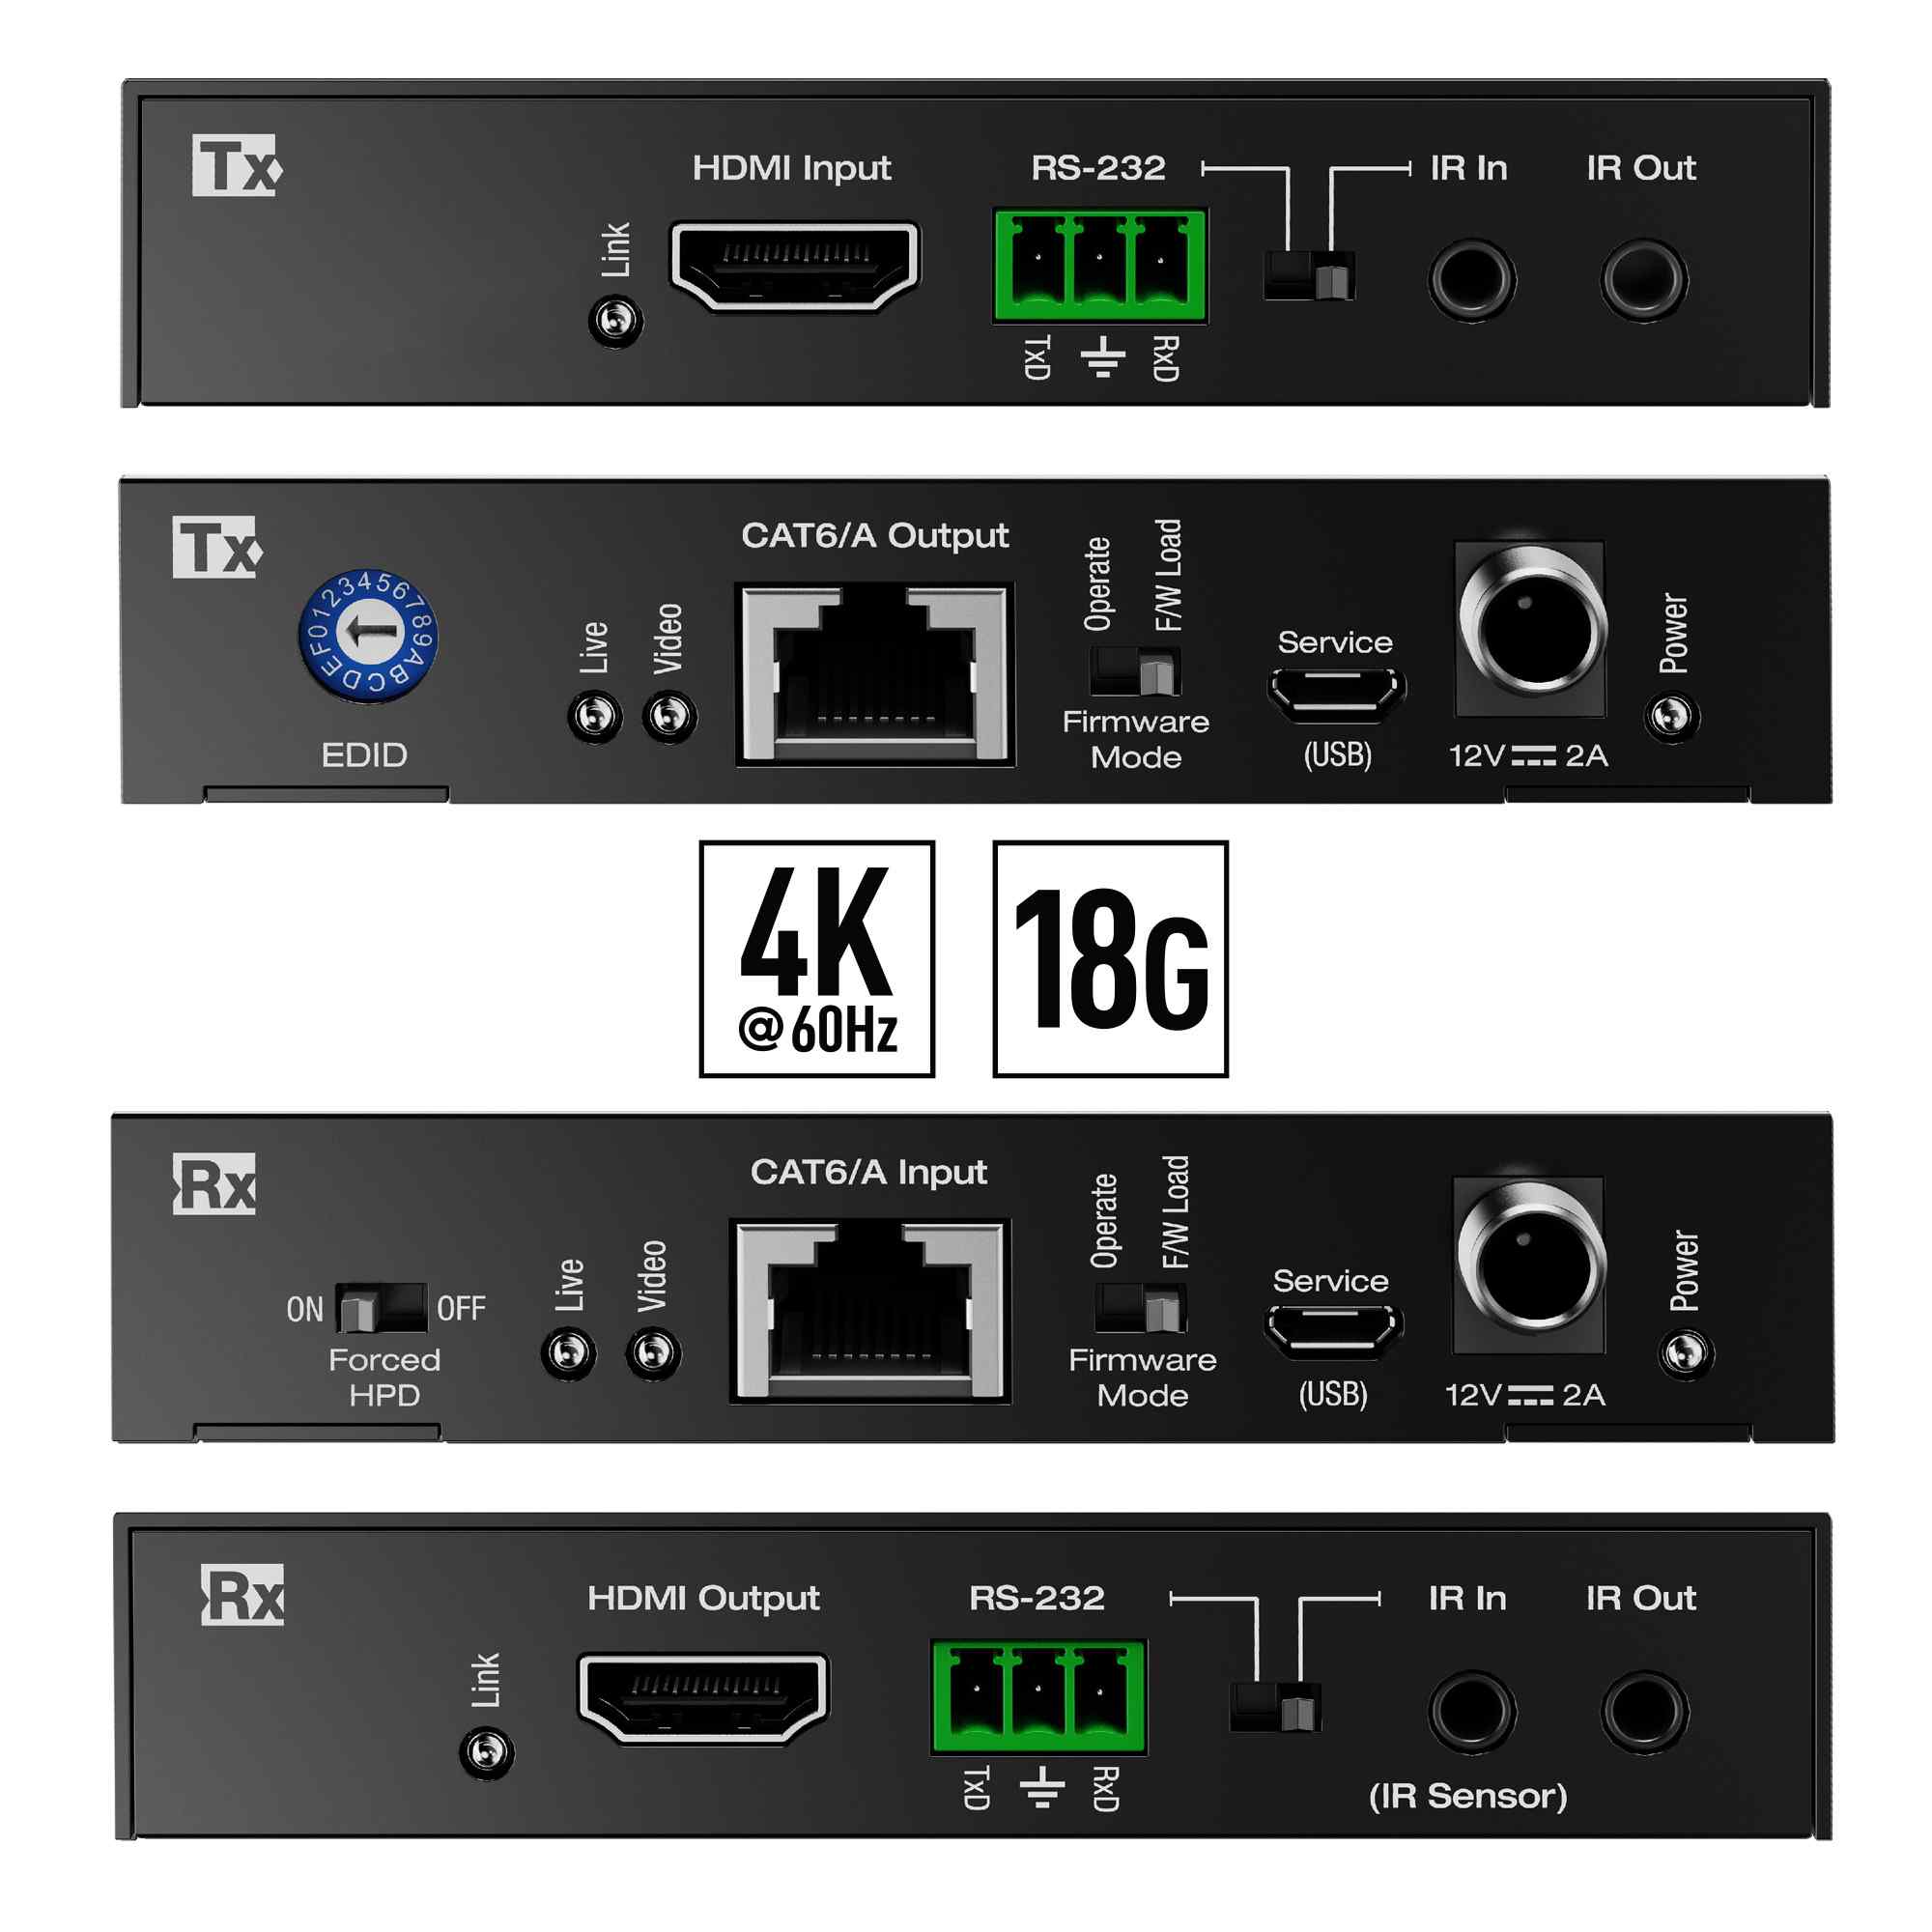 KD hdmi extender 4k Tx and Rx front and rear